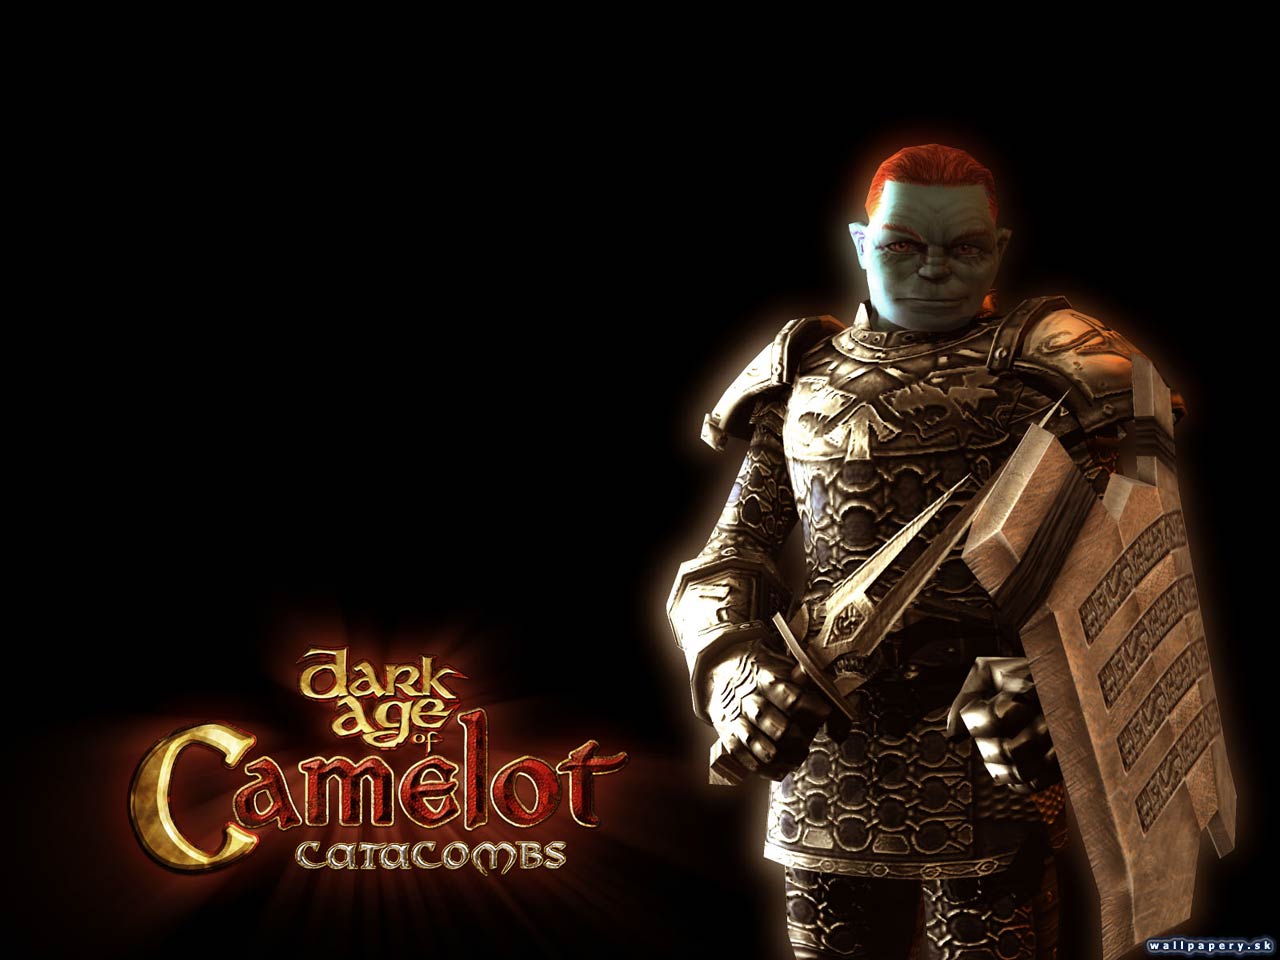 Dark Age of Camelot: Catacombs - wallpaper 3